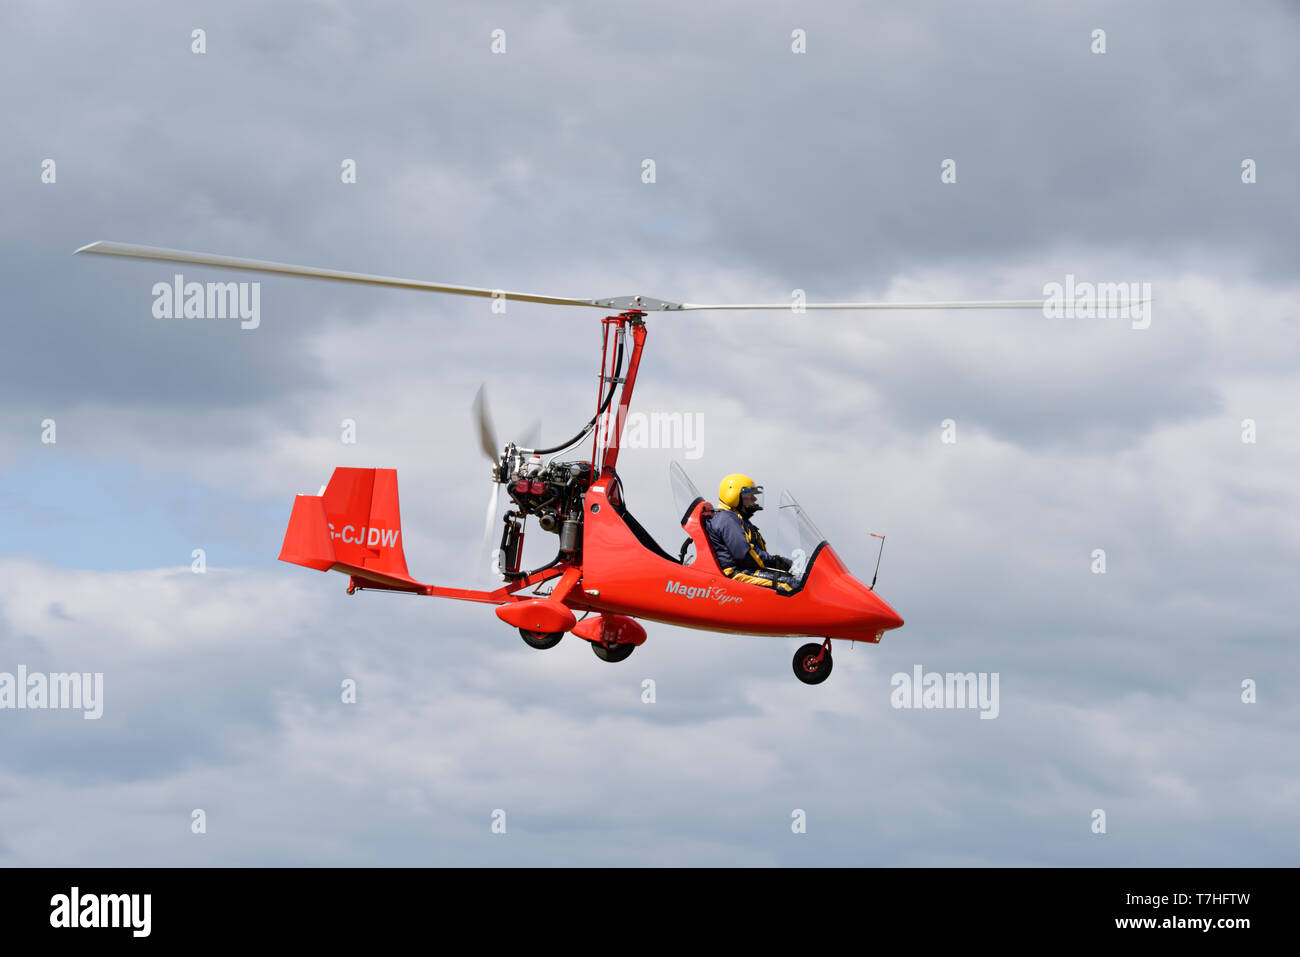 G-CJDW a bright red Magni M16C gyrocopter descends into Popham airfield during the Spring microlight aviation fly-in event Stock Photo